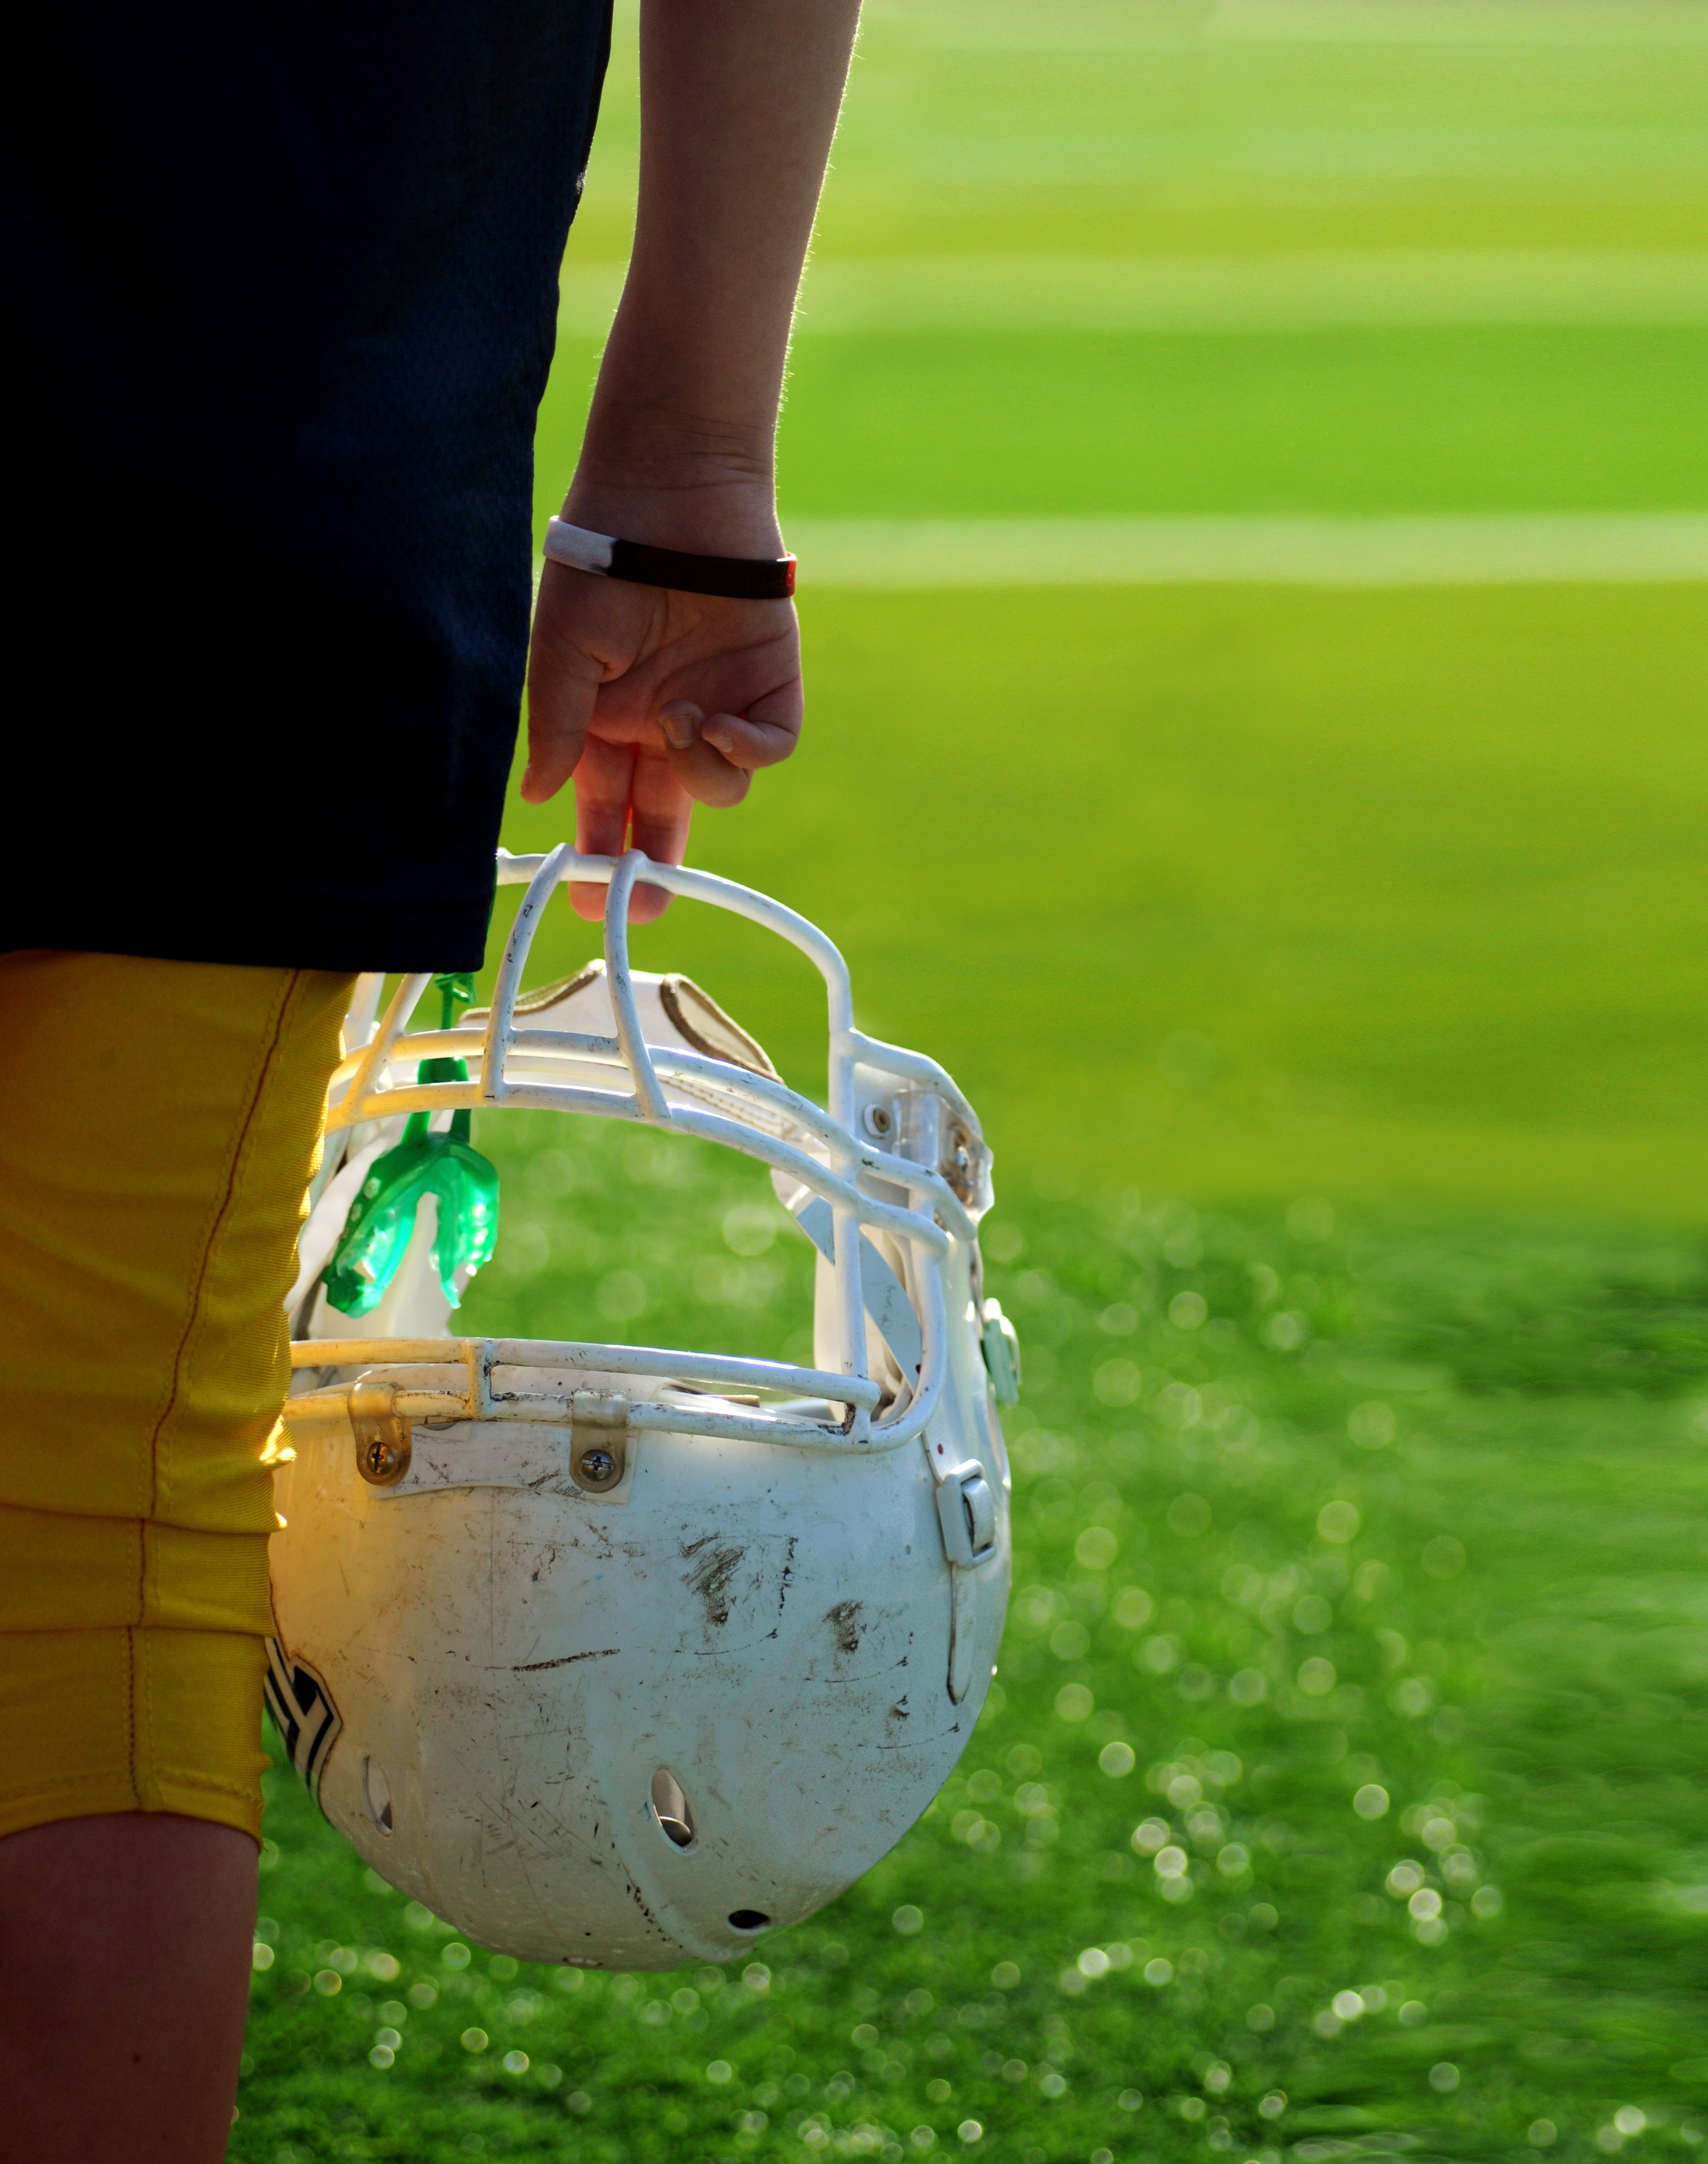 Football helmet and mouthguard Photo by Ben Hershey on Unsplash